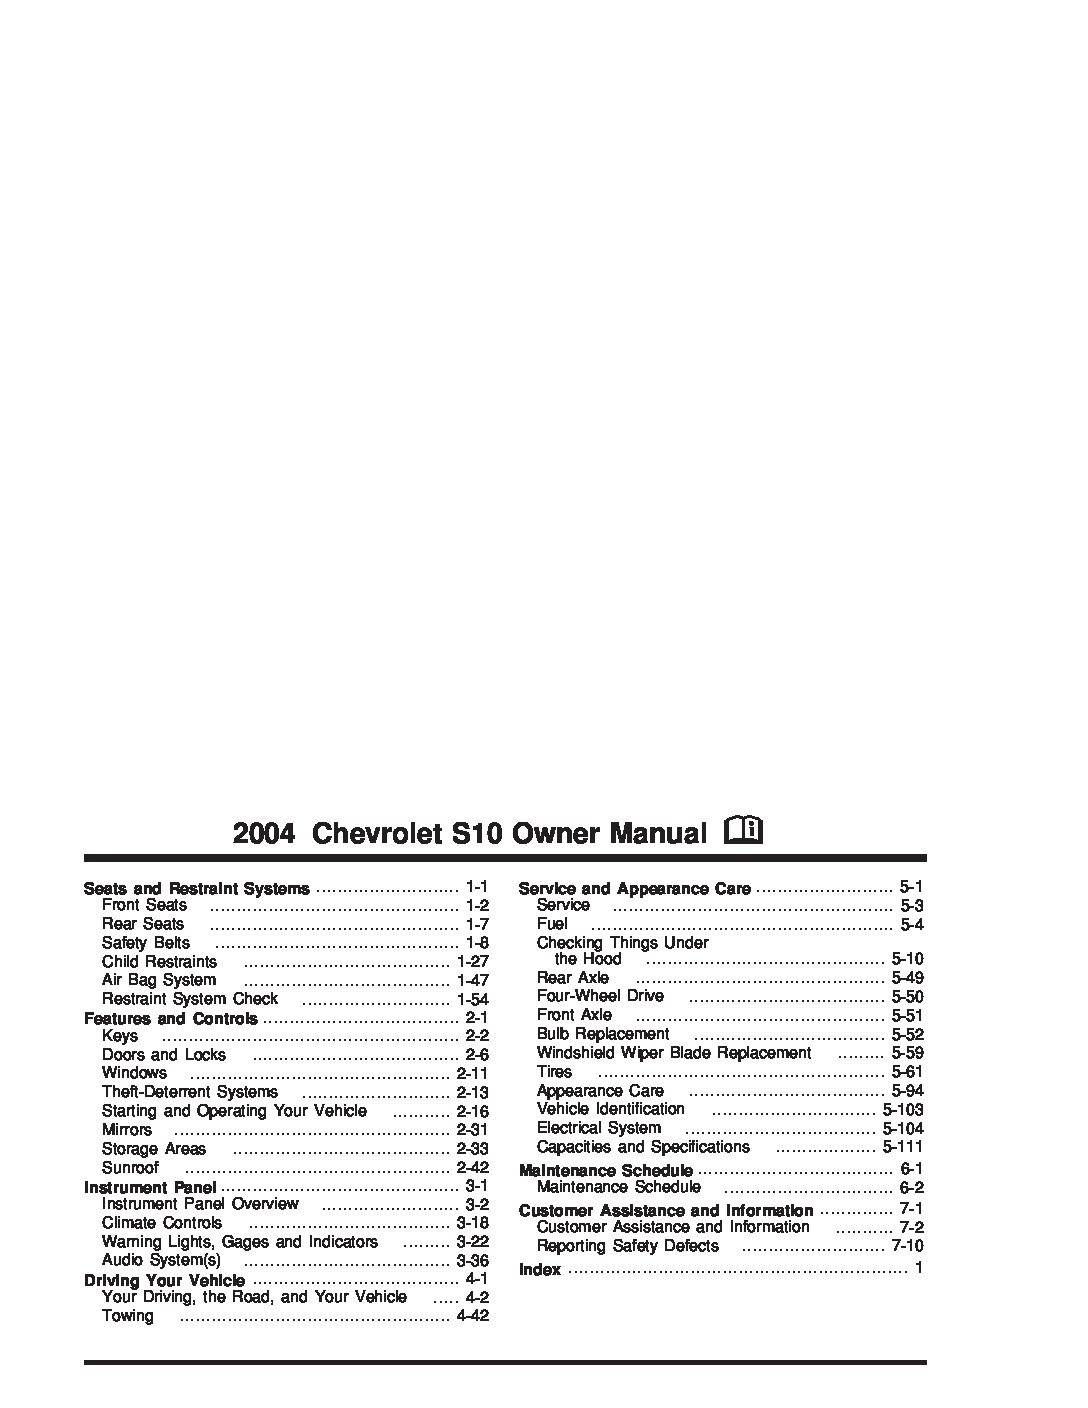 2004 Chevrolet S10 Owner’s Manual Image